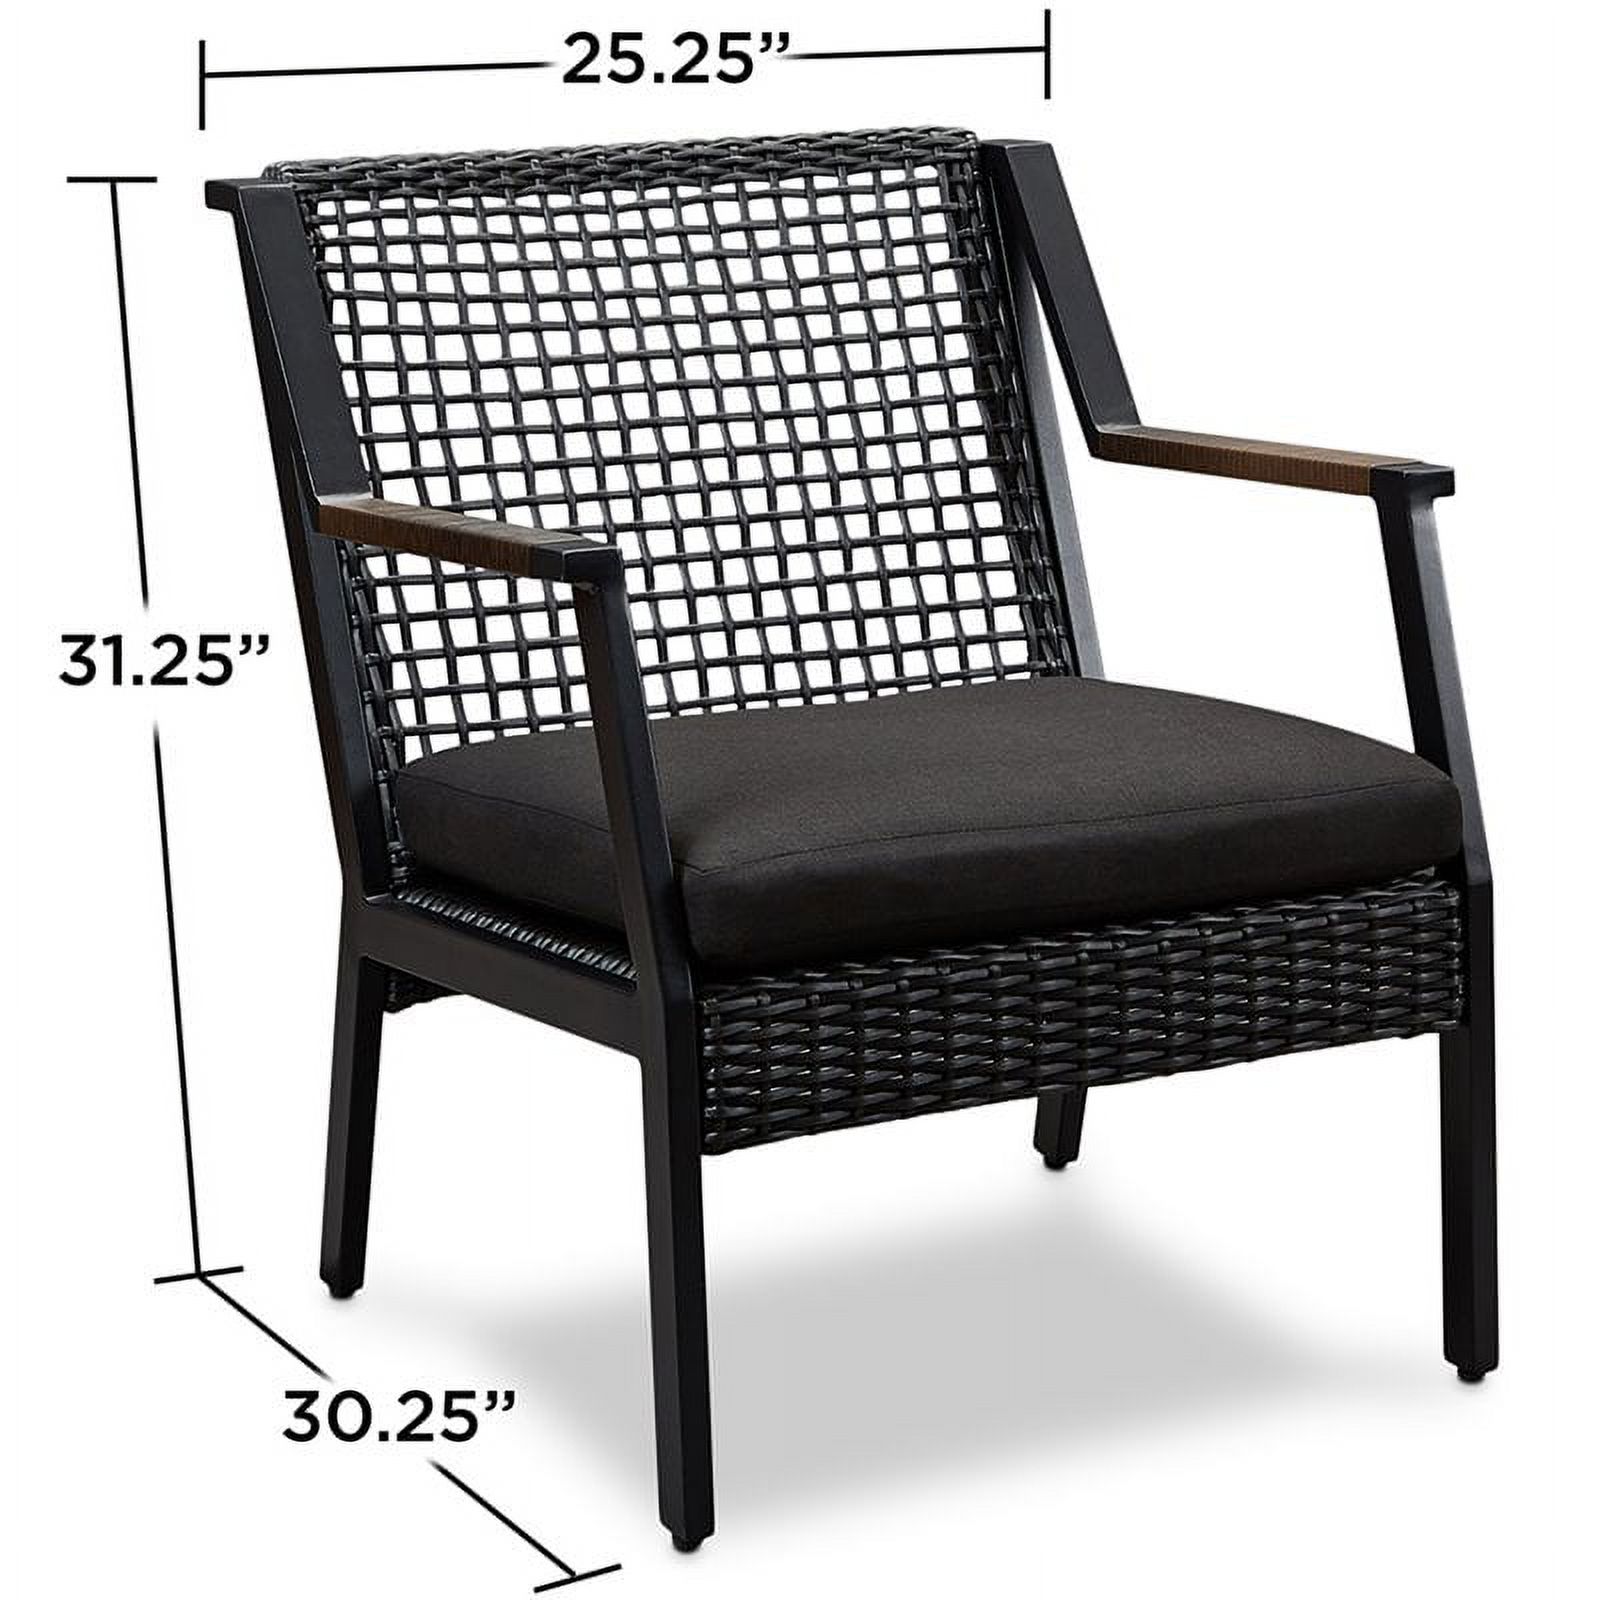 Home Square 3 Piece Garden Patio Set with Fire Table and 2 Chairs in Black - image 4 of 15